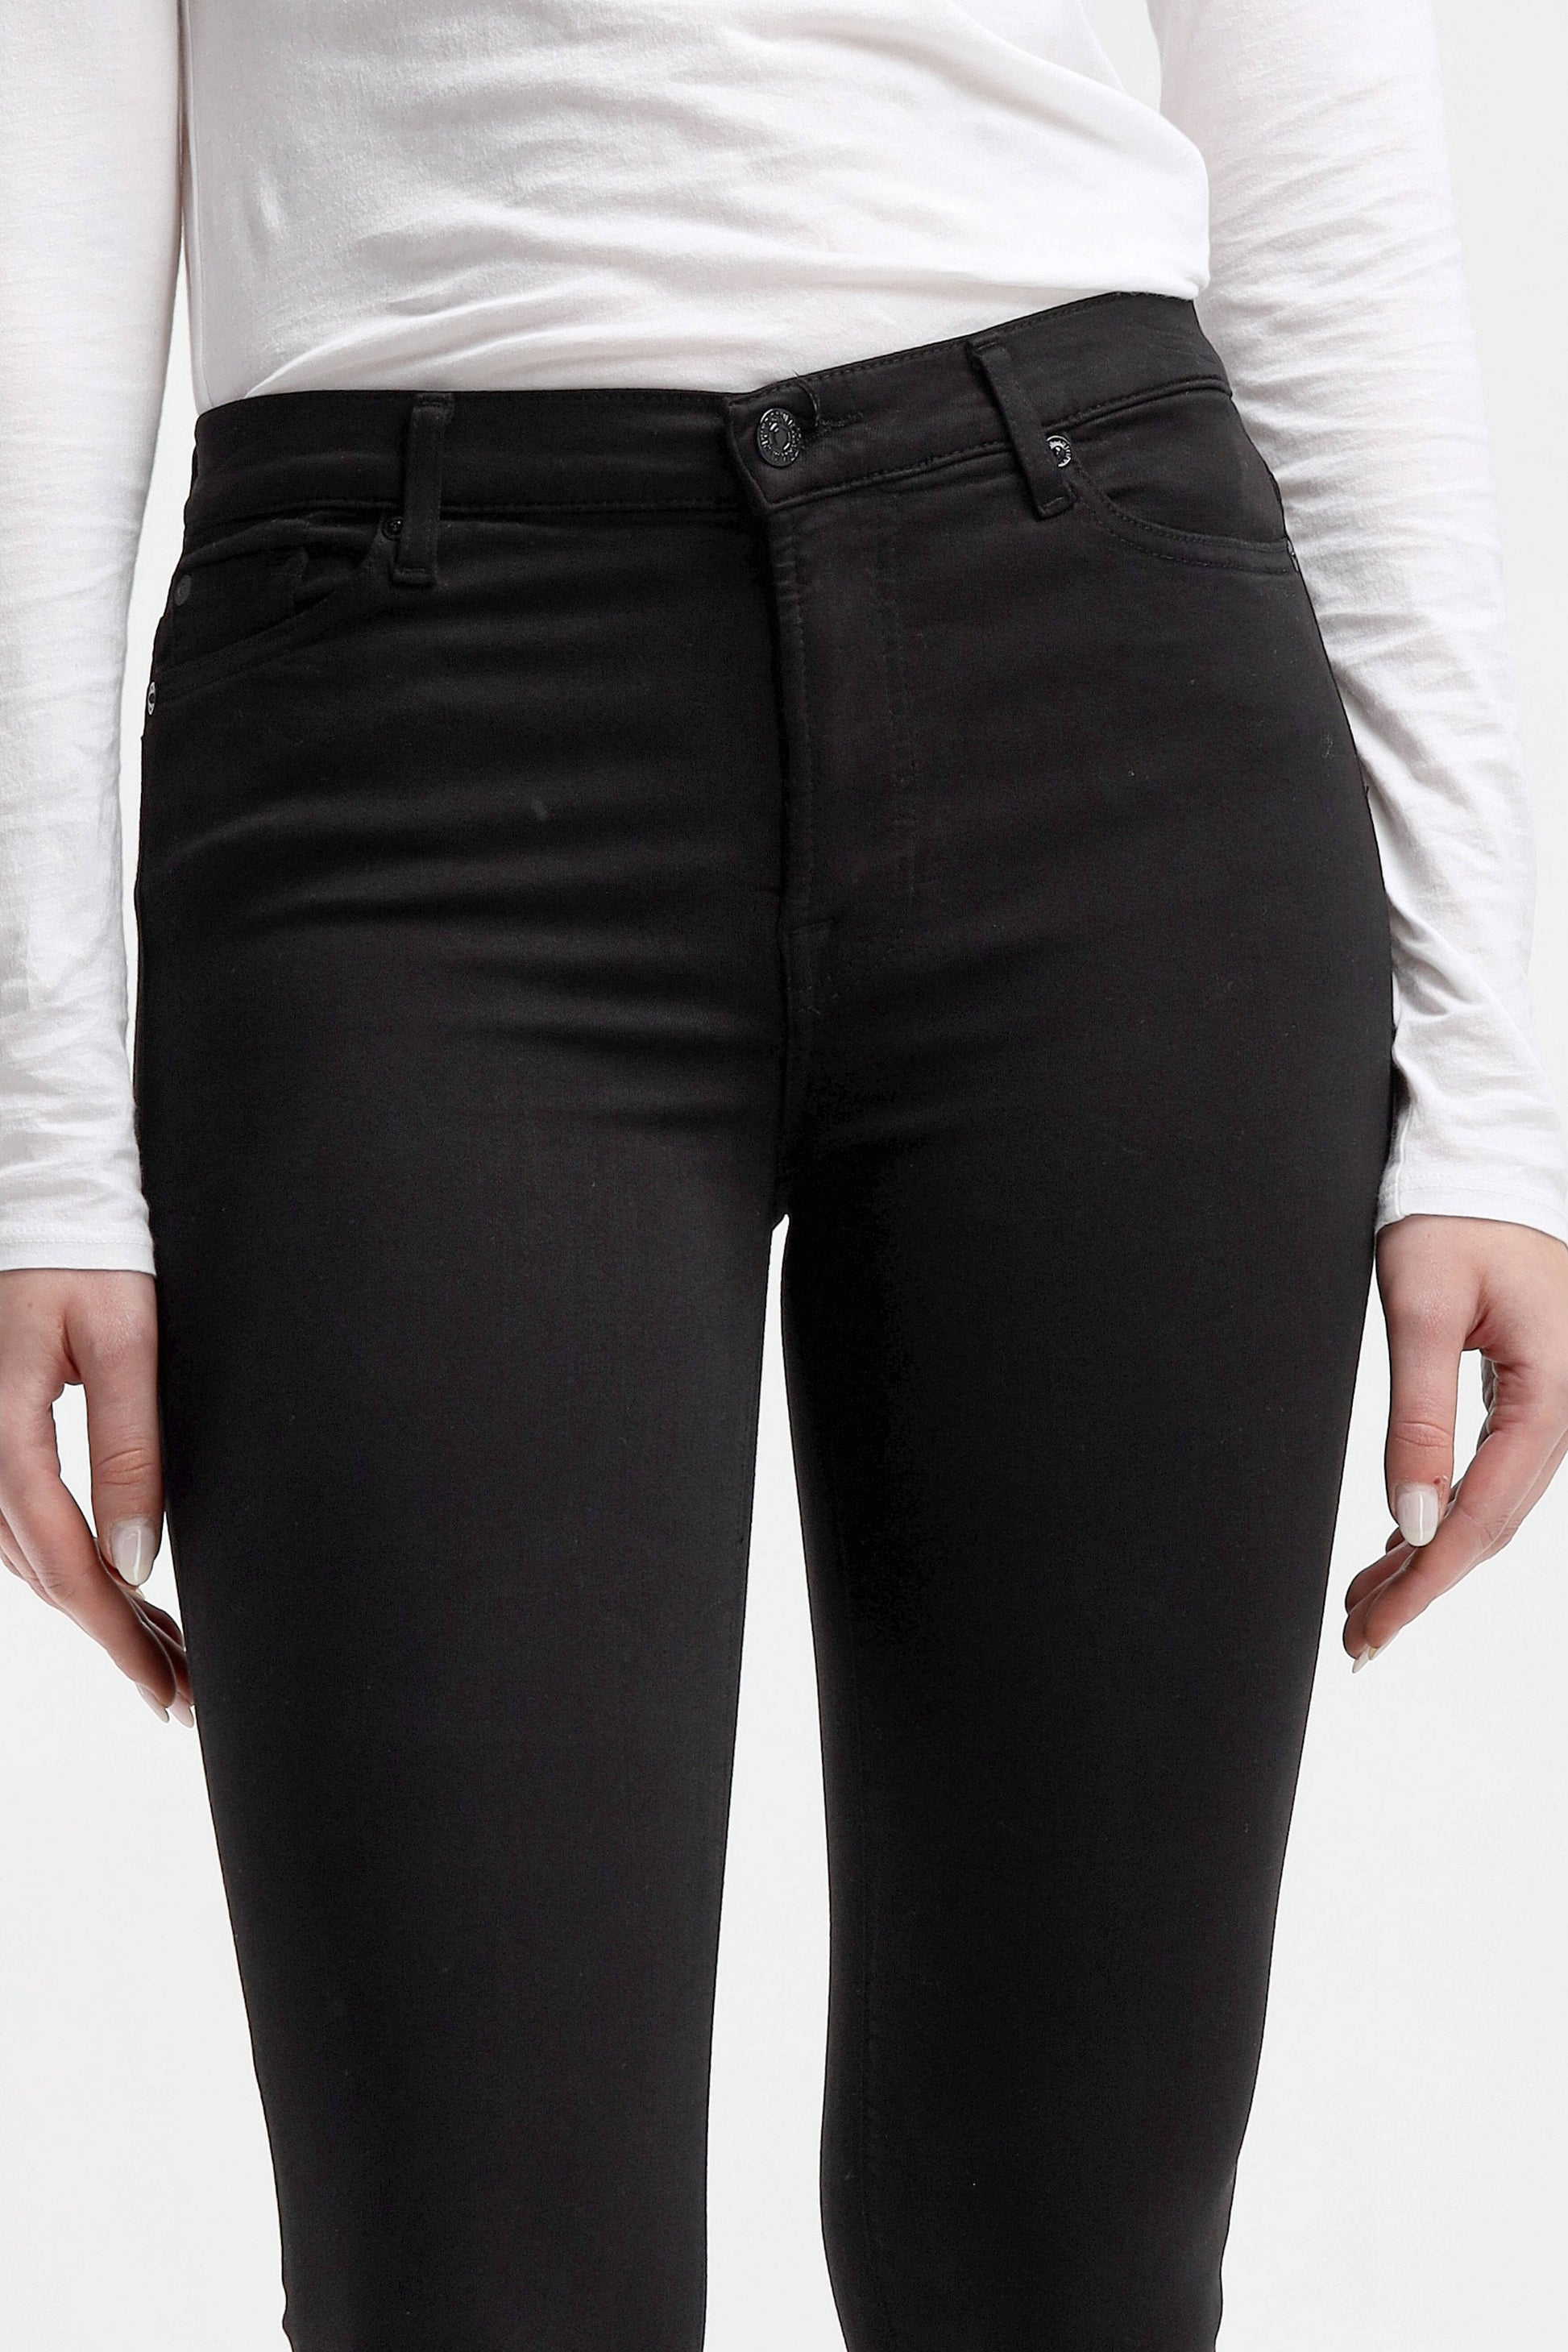 Jeans Skinny Slim Illusion in Schwarz7 For All Mankind - Anita Hass